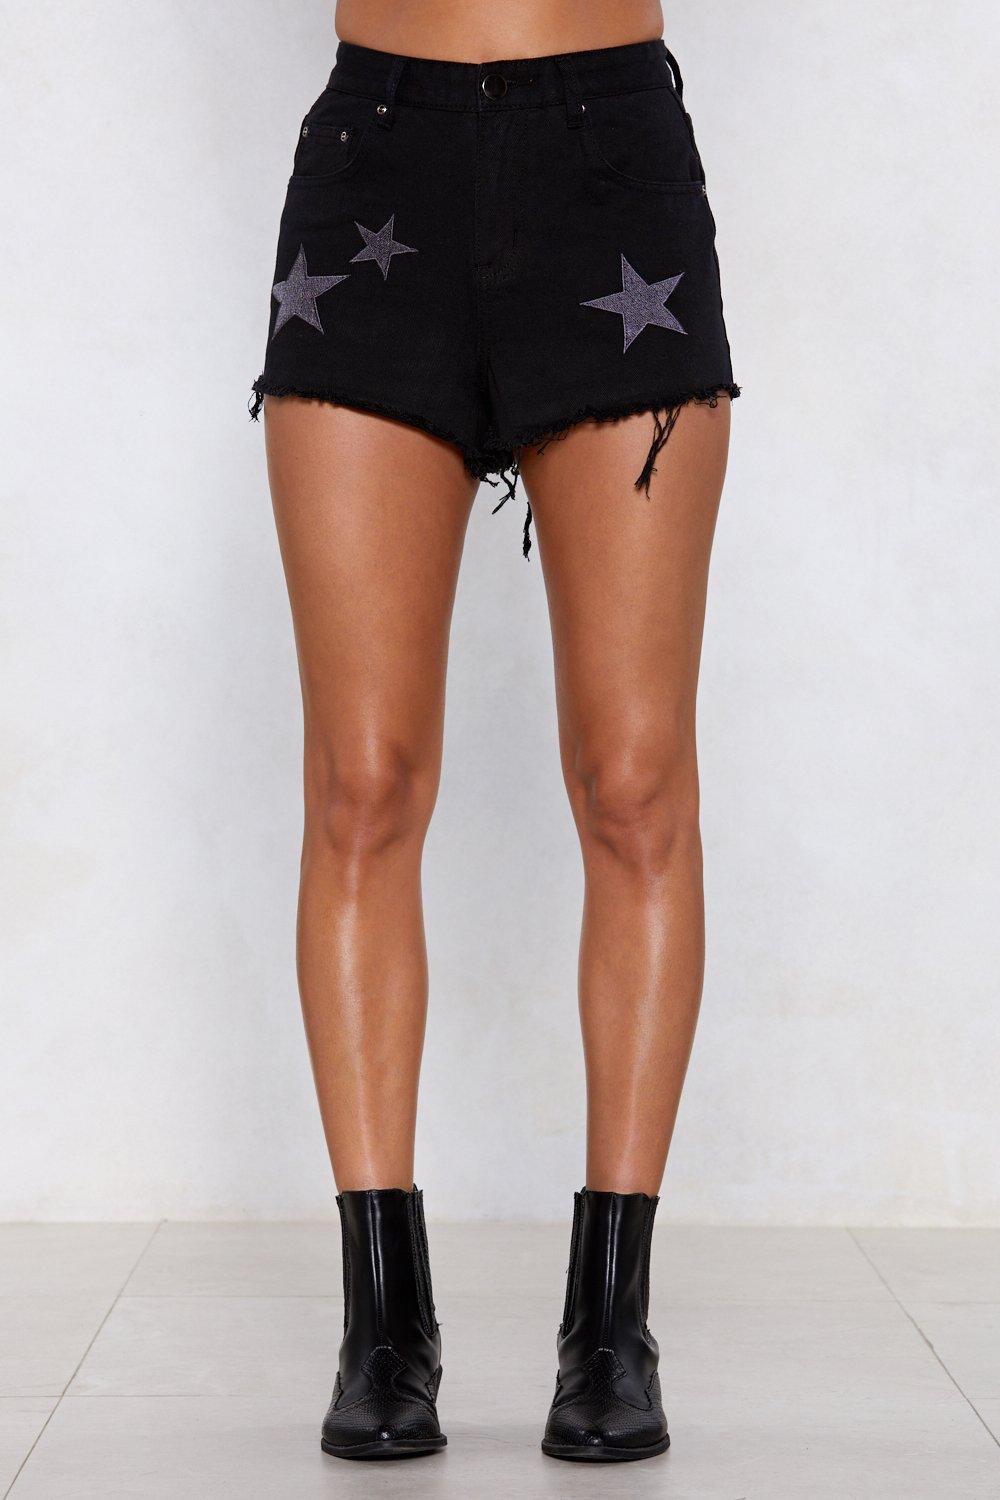 jean shorts with stars on them